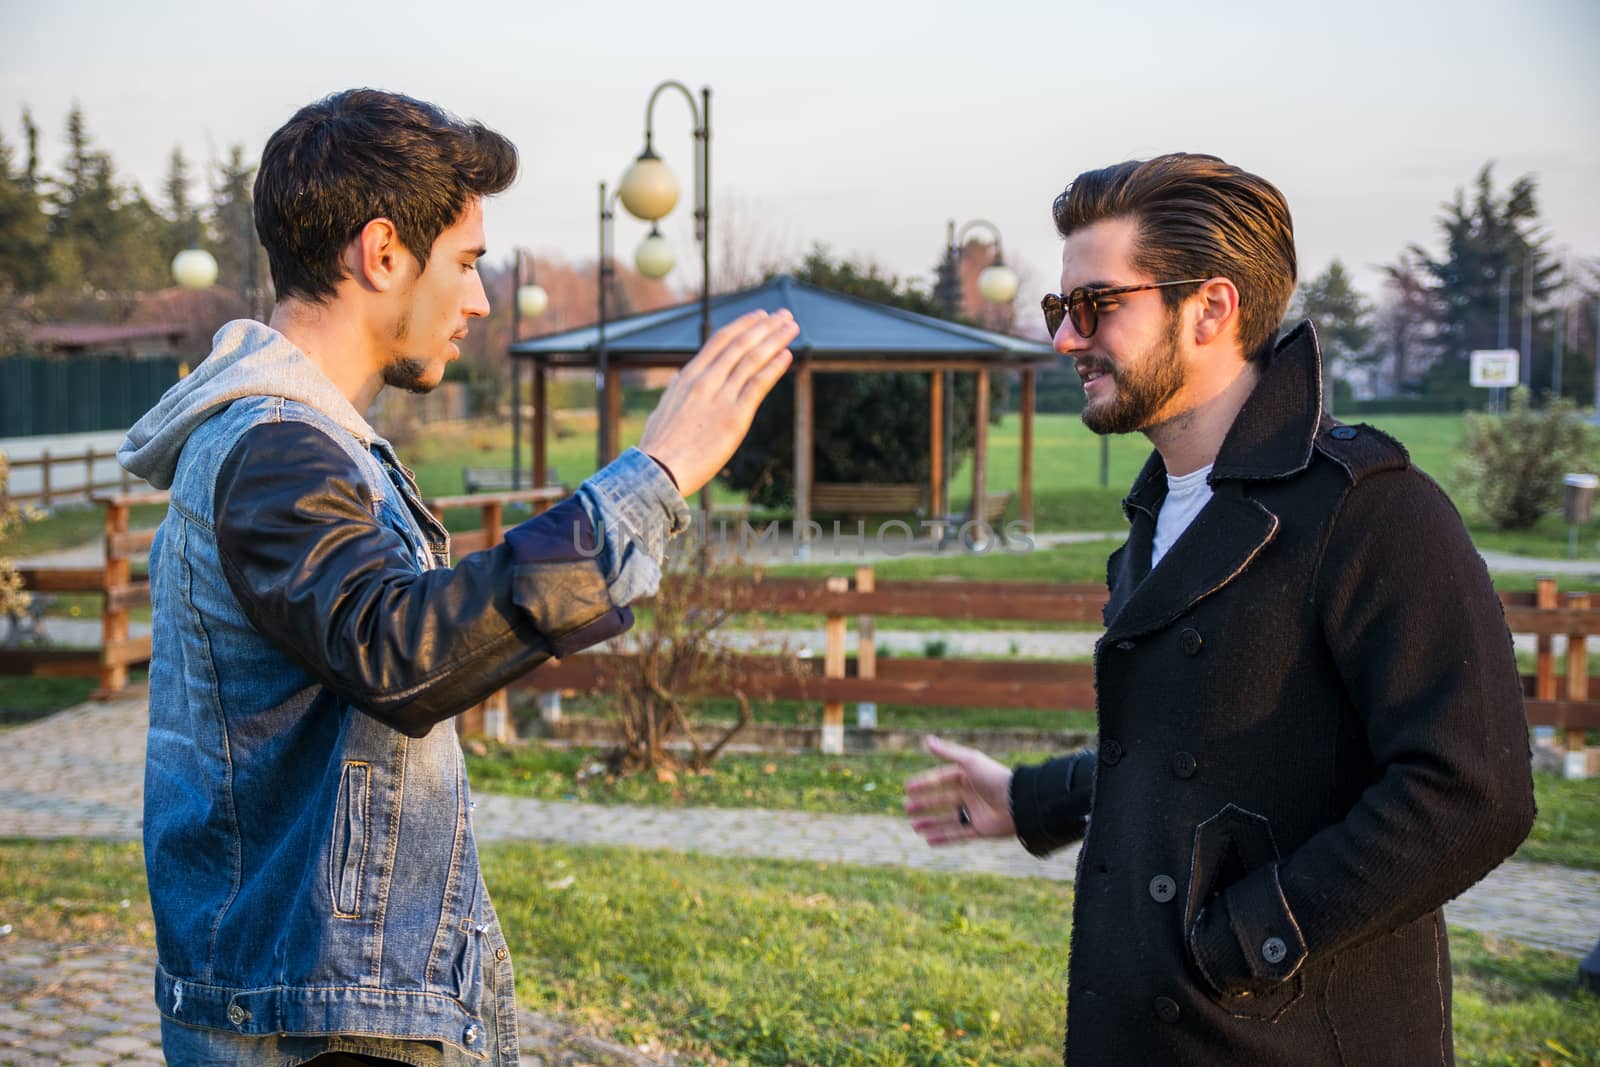 Two handsome casual trendy young men greeting outdoors in an urban park gripping hands with happy welcoming smiles